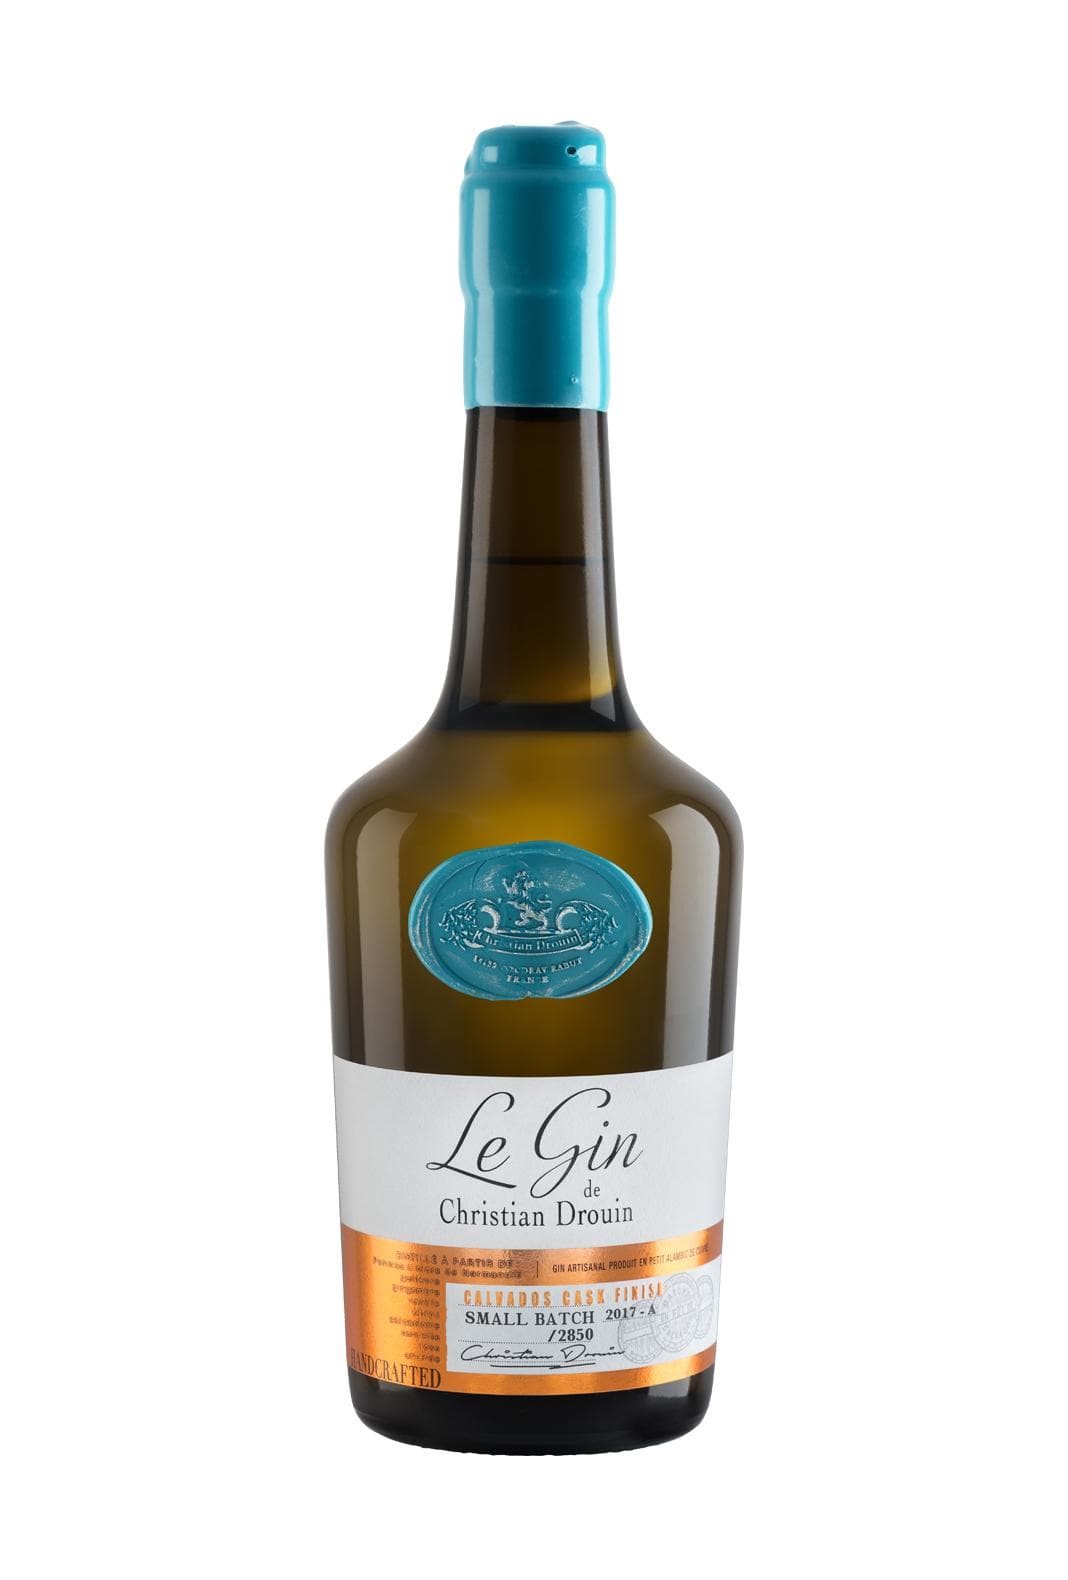 Christian Drouin Gin 'Le Gin' Calvados cask finish 42% 700ml | Gin | Shop online at Spirits of France